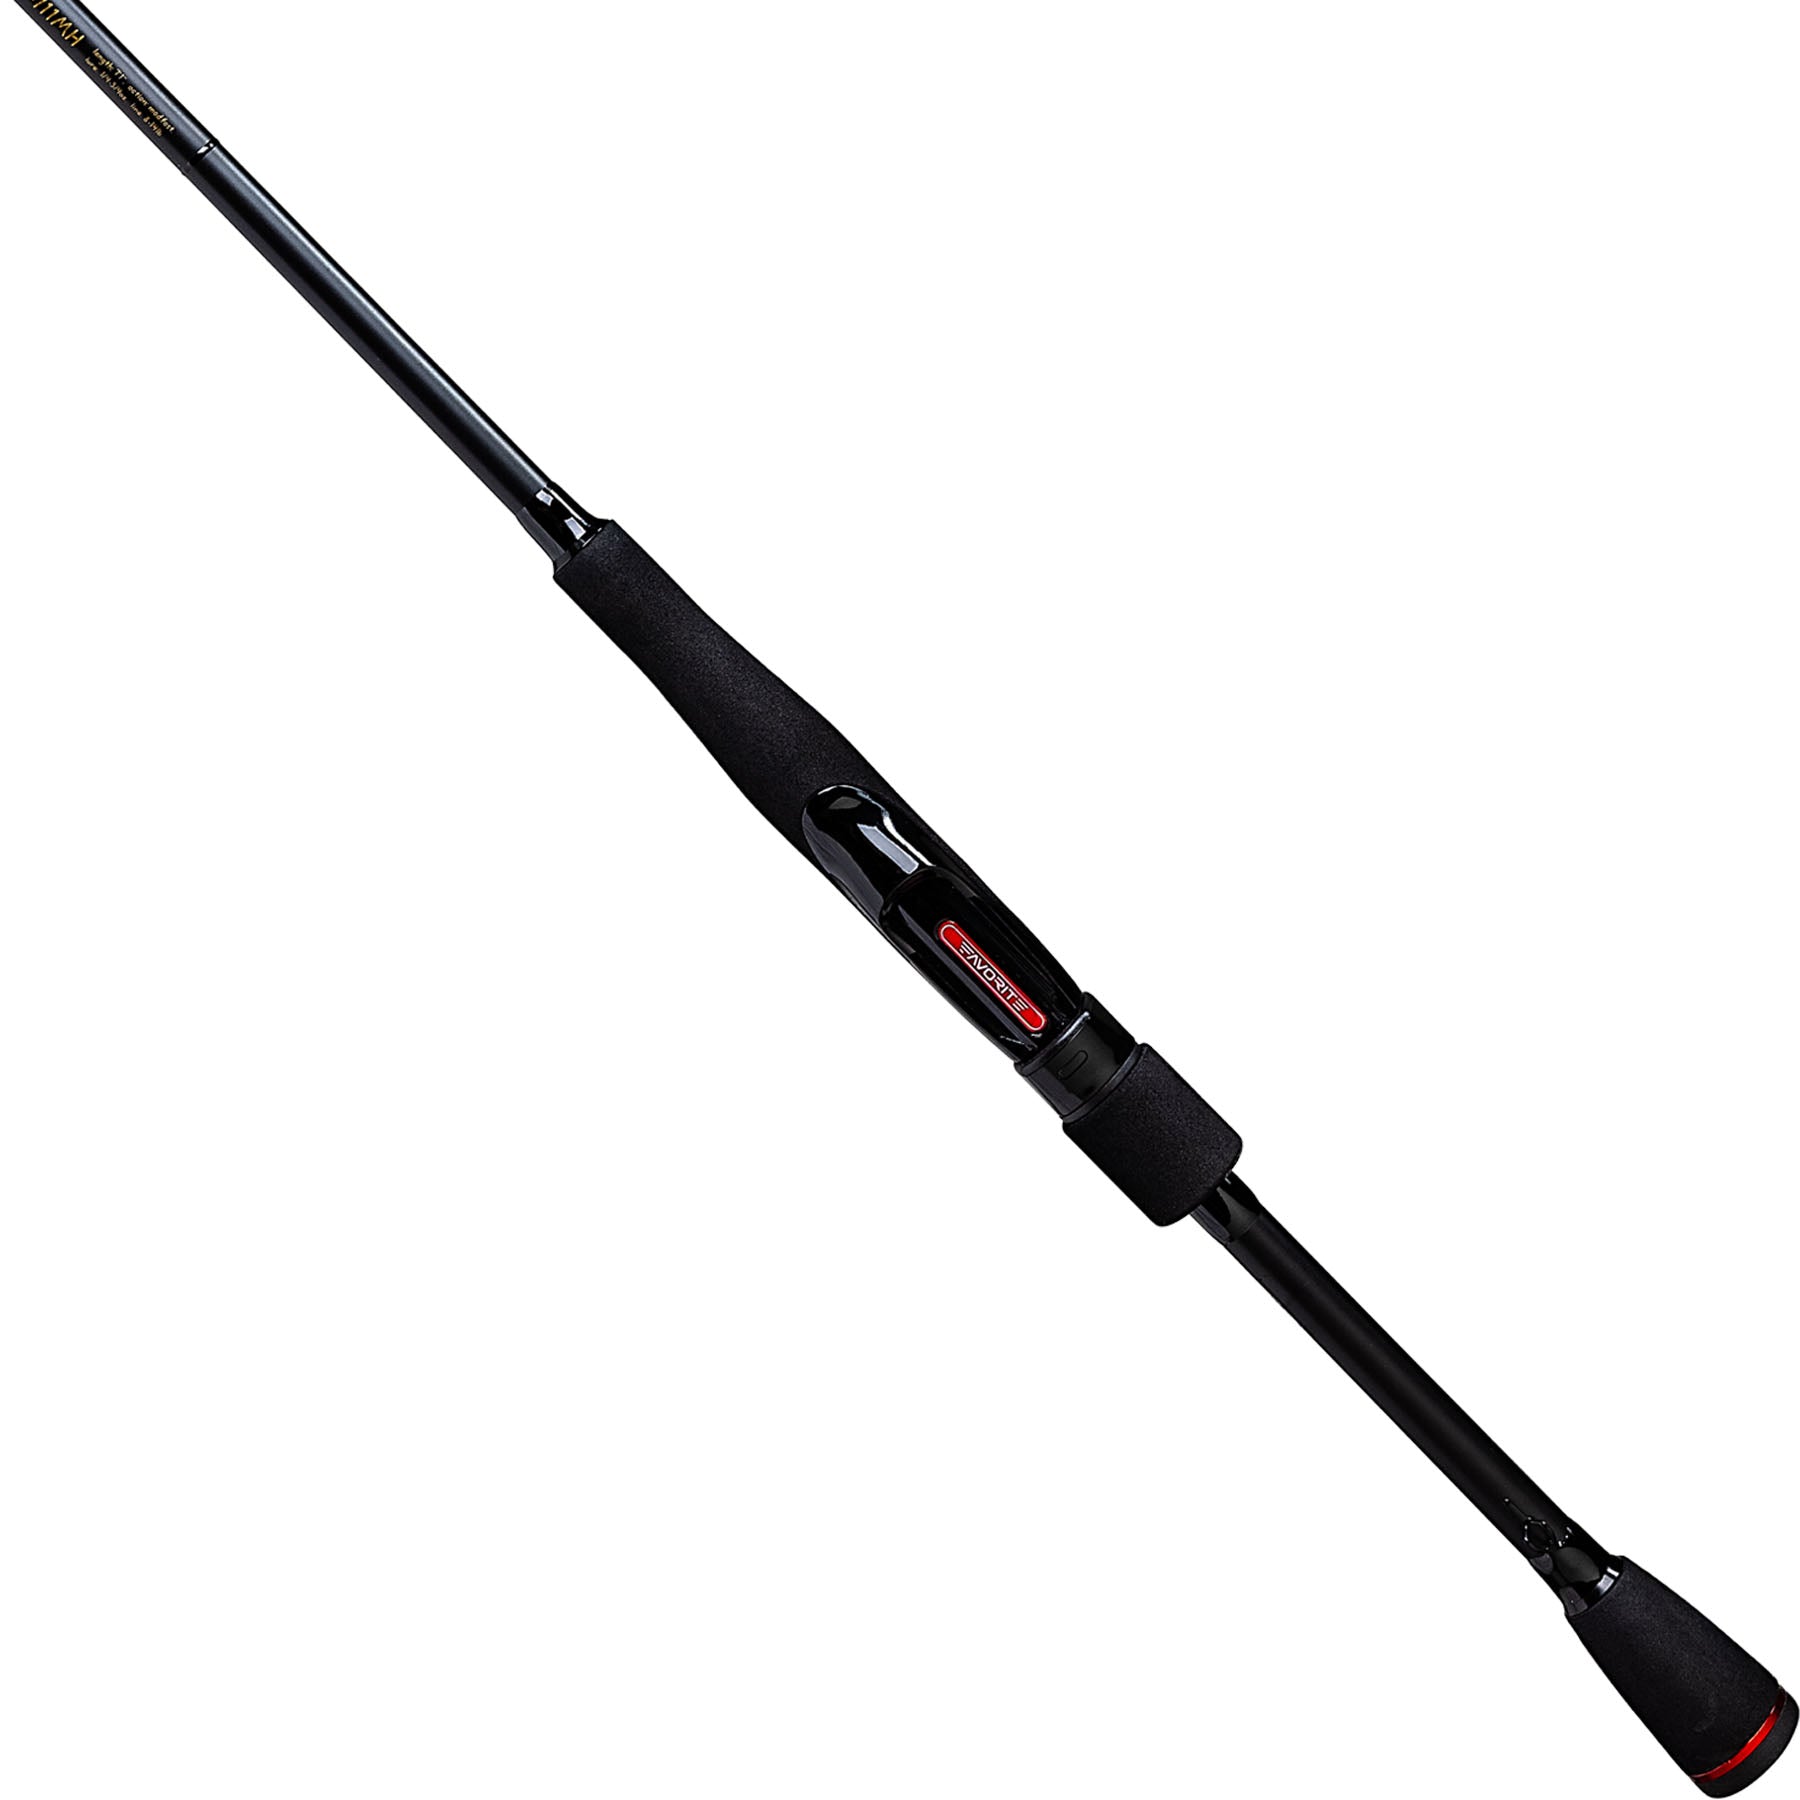 Favorite Fishing Sick Stick Blat Casting Rod SKSC-BLAT-6101M with Free S&H  — CampSaver